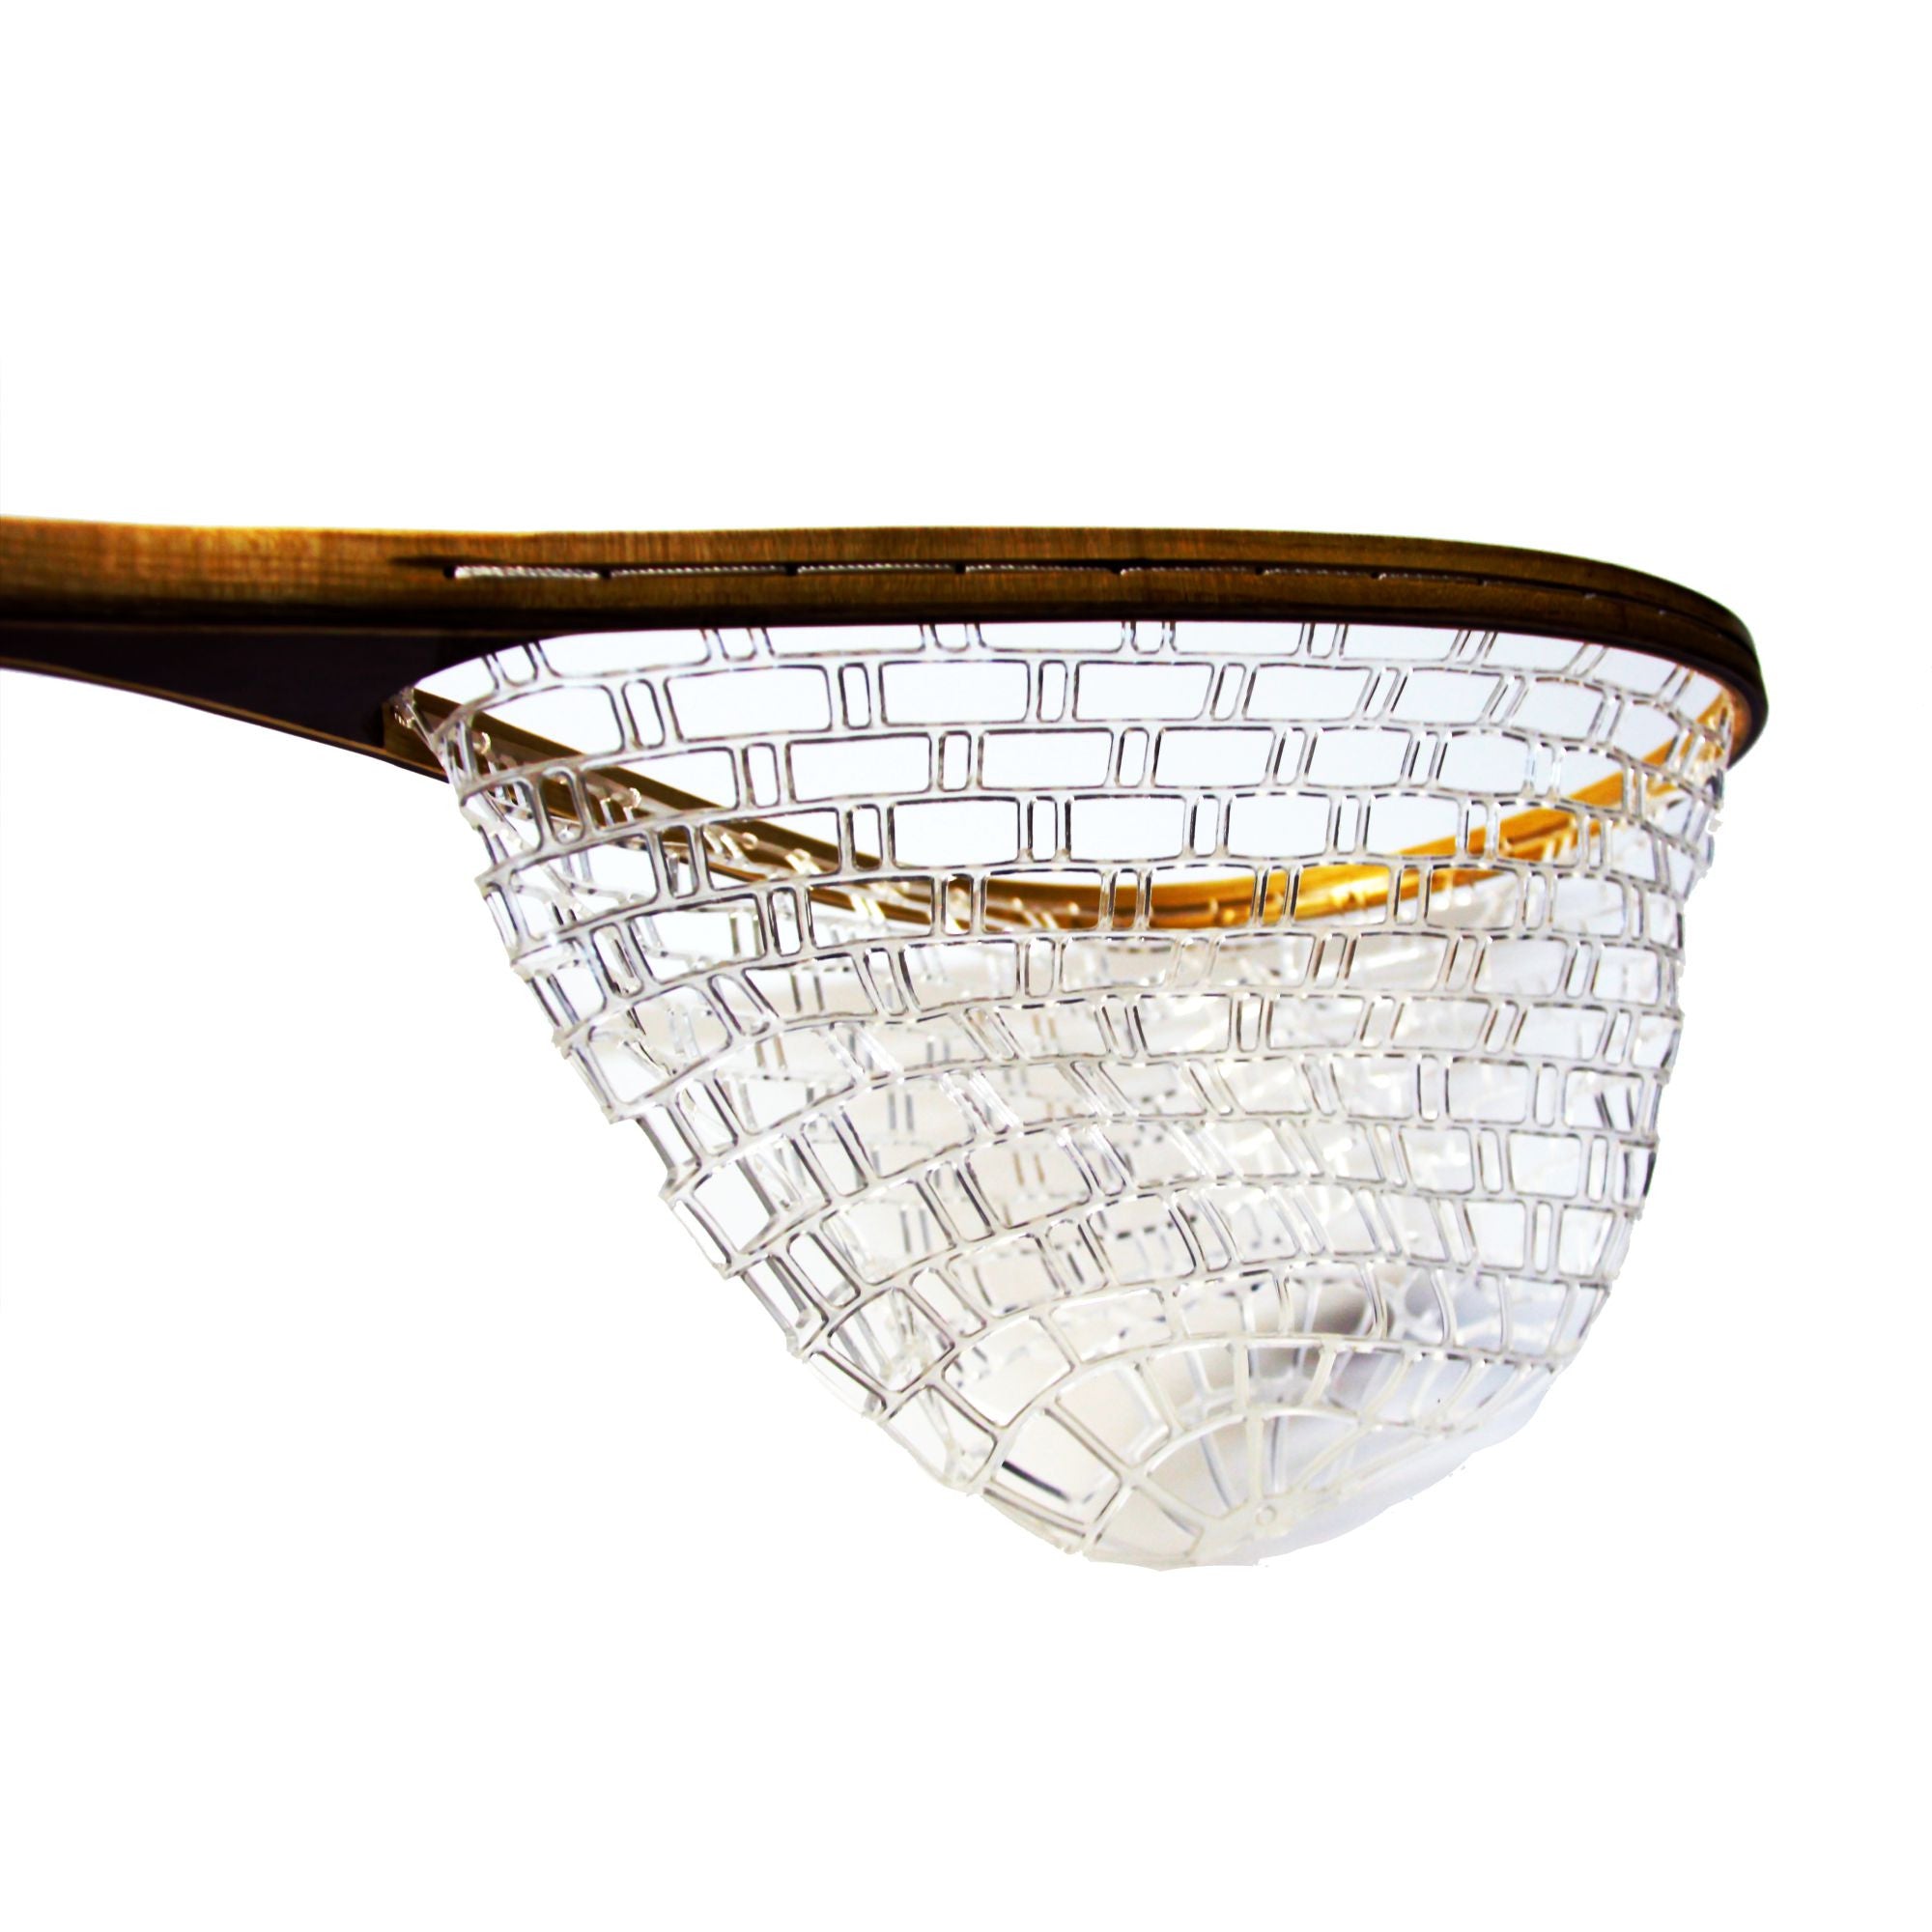 Fish Grips vs. Landing Net (Which One Is Better)? 